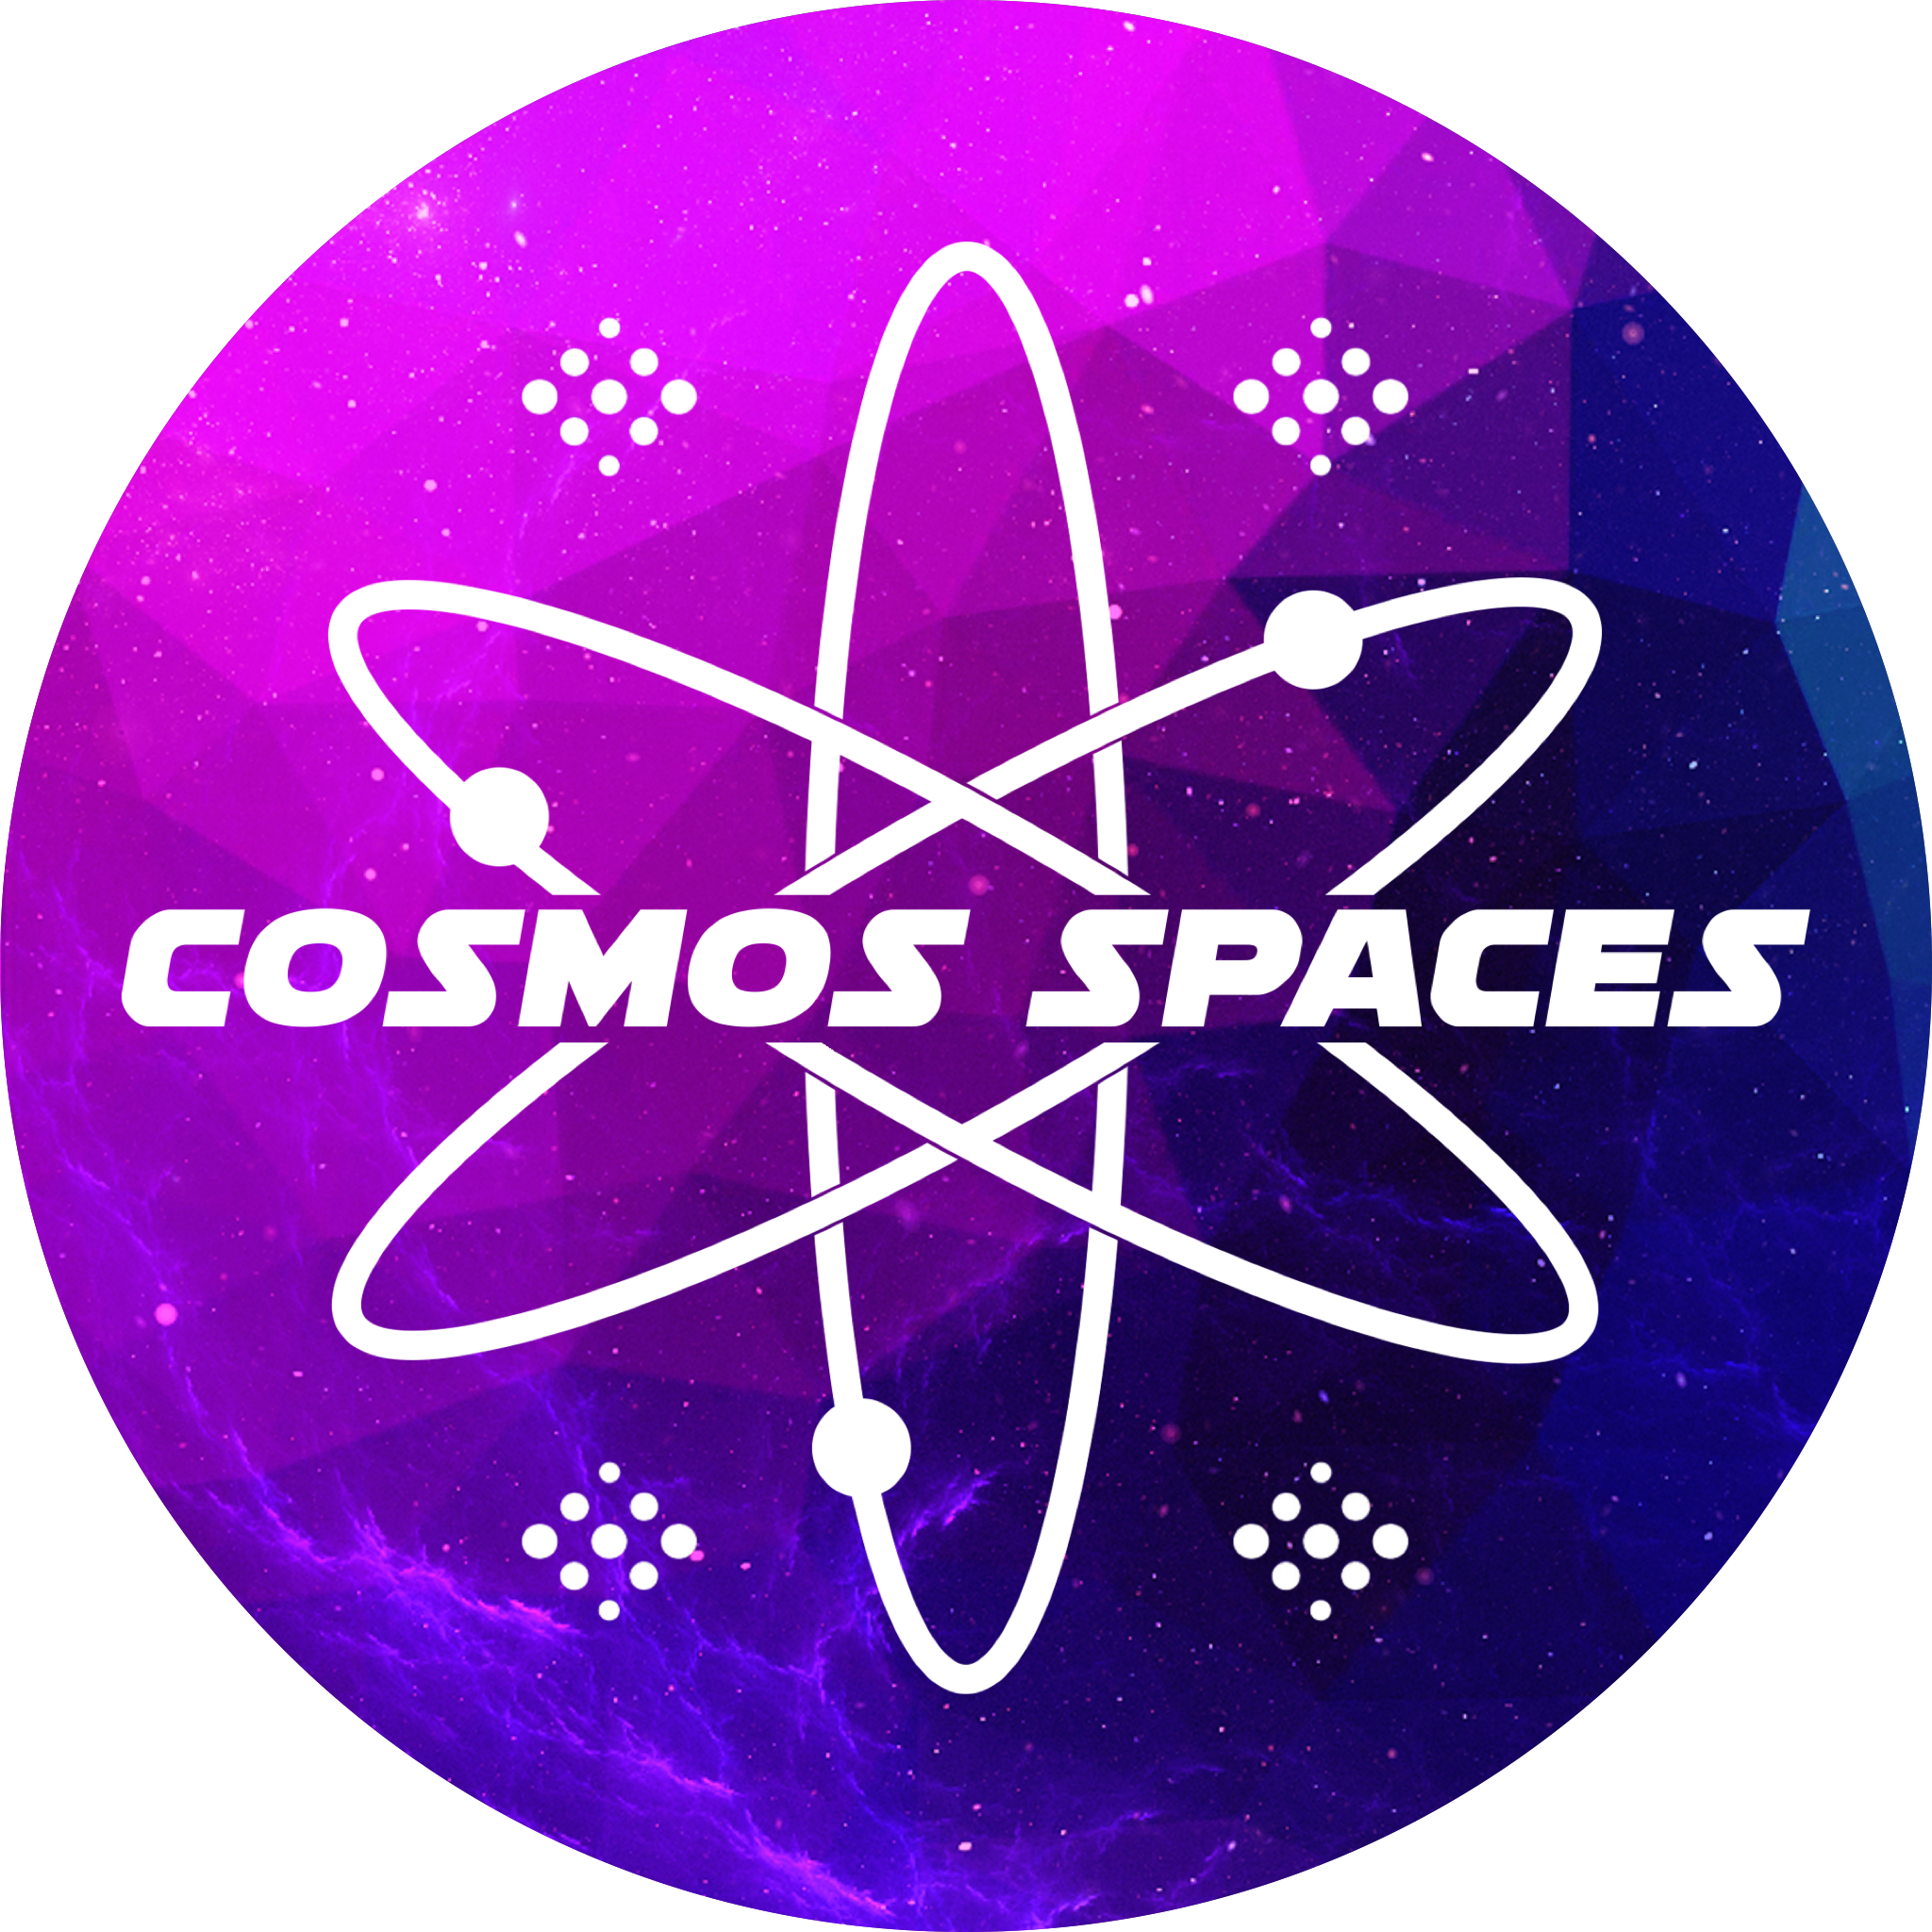 Space media. Медиа космос. About Cosmos. Reborn from the Cosmos. Information about the Cosmos.